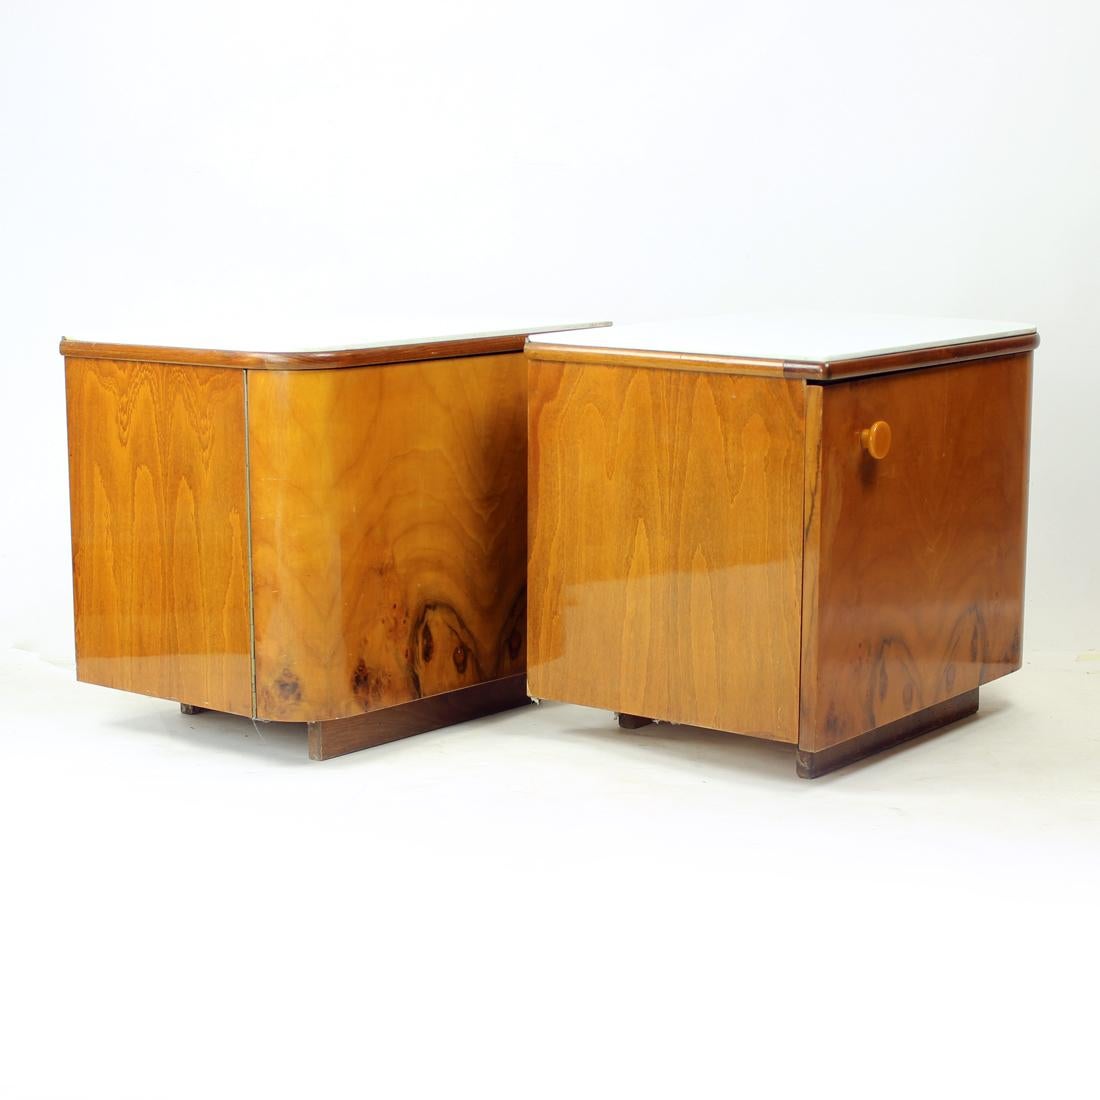 1960s Bedside Tables In Walnut And White Glass, Czechoslovakia For Sale 7